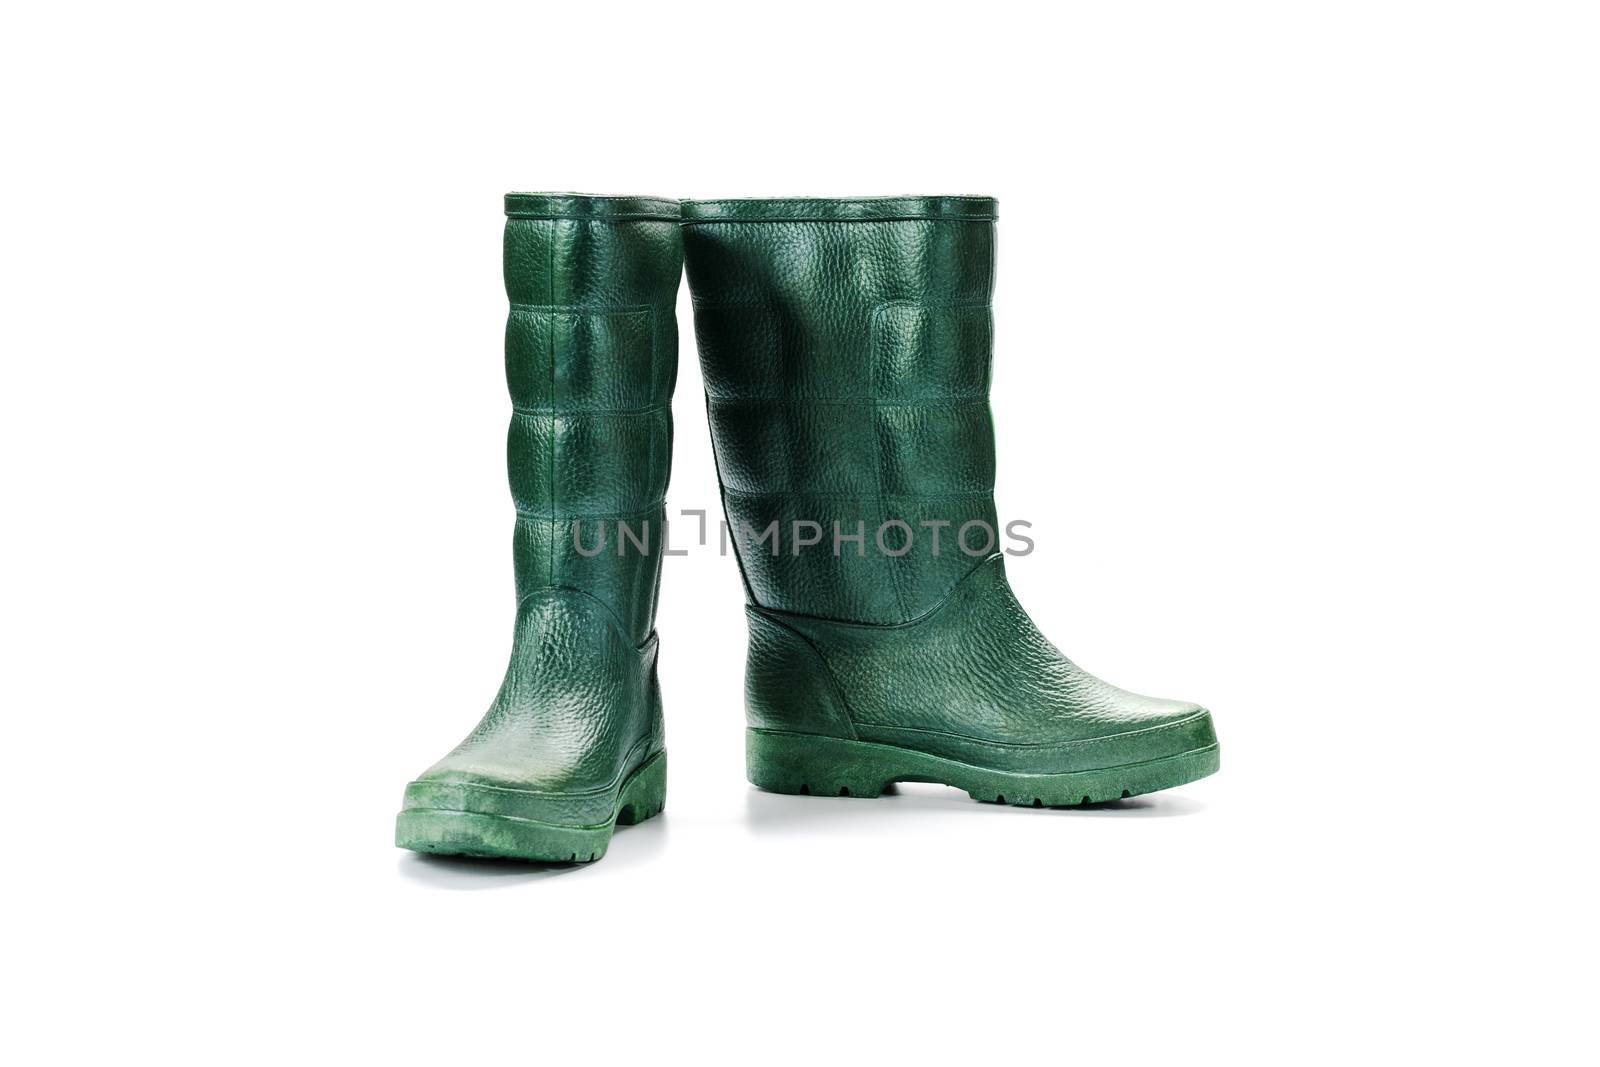 Rubber boots waterproof isolated on white background.